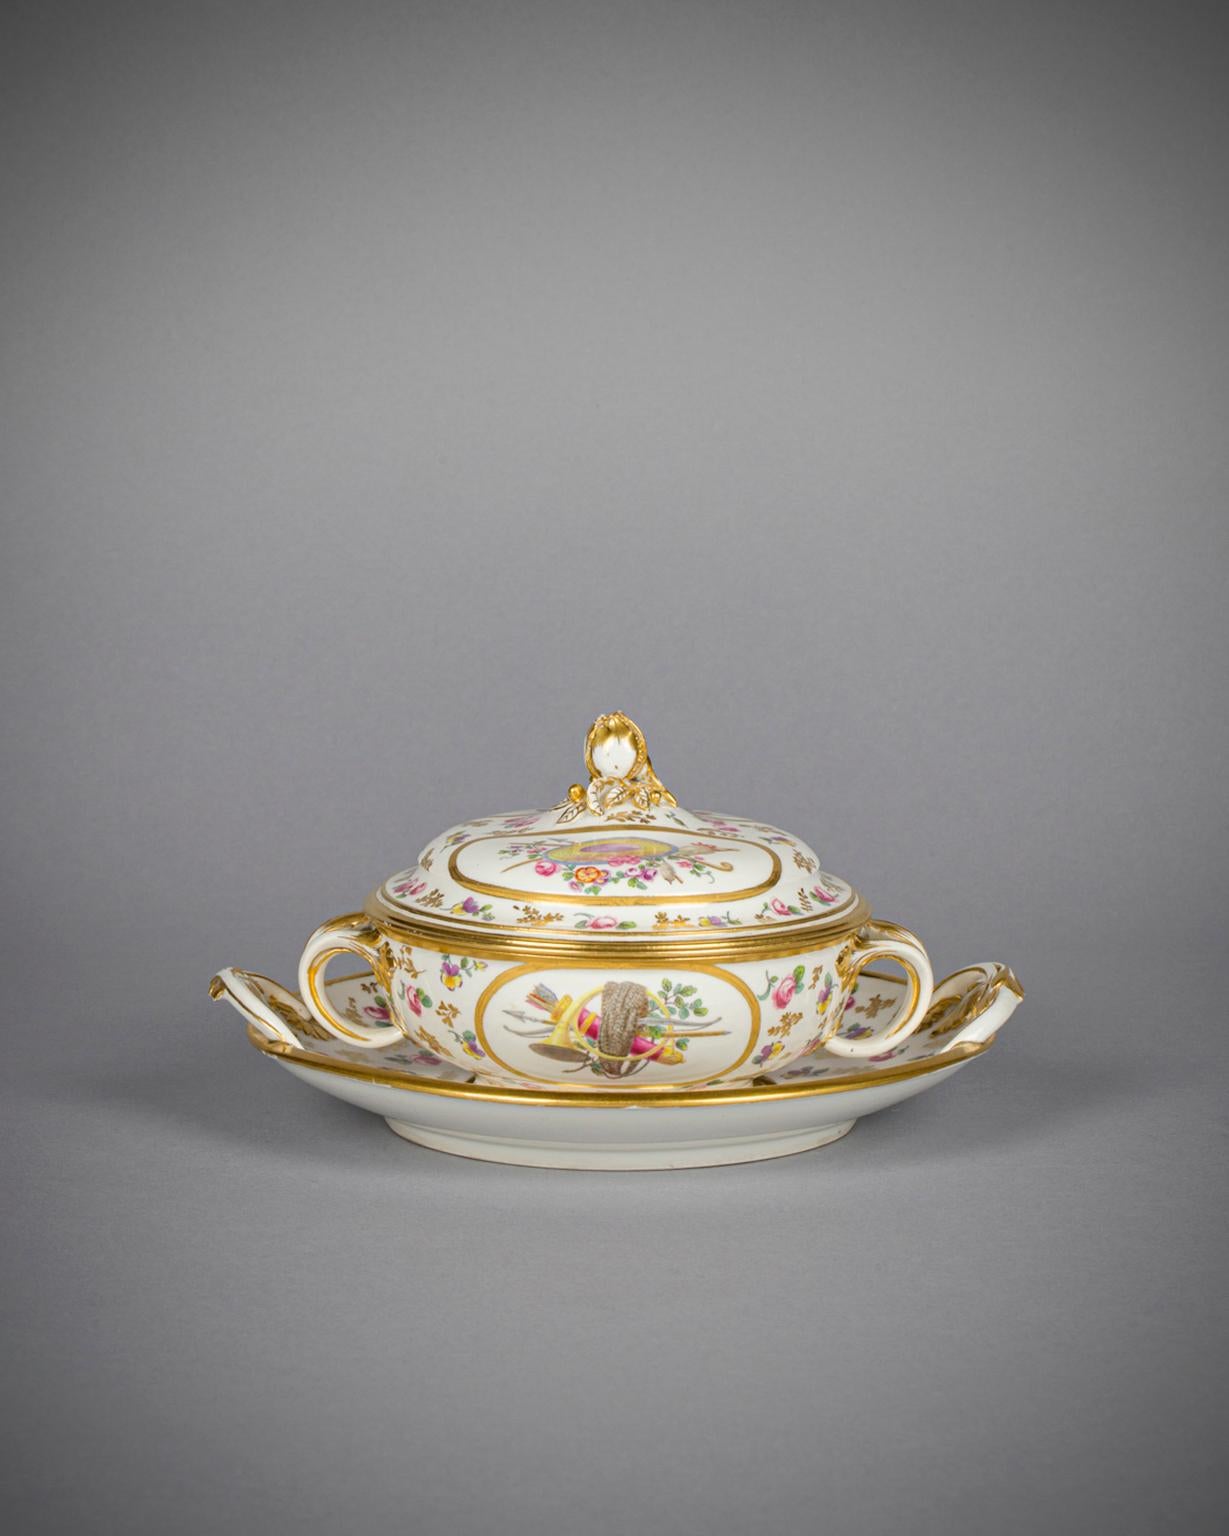 Sèvres White Glazed and Gilt Porcelain Écuelle, Cover and Underplate, circa 1775 For Sale 2